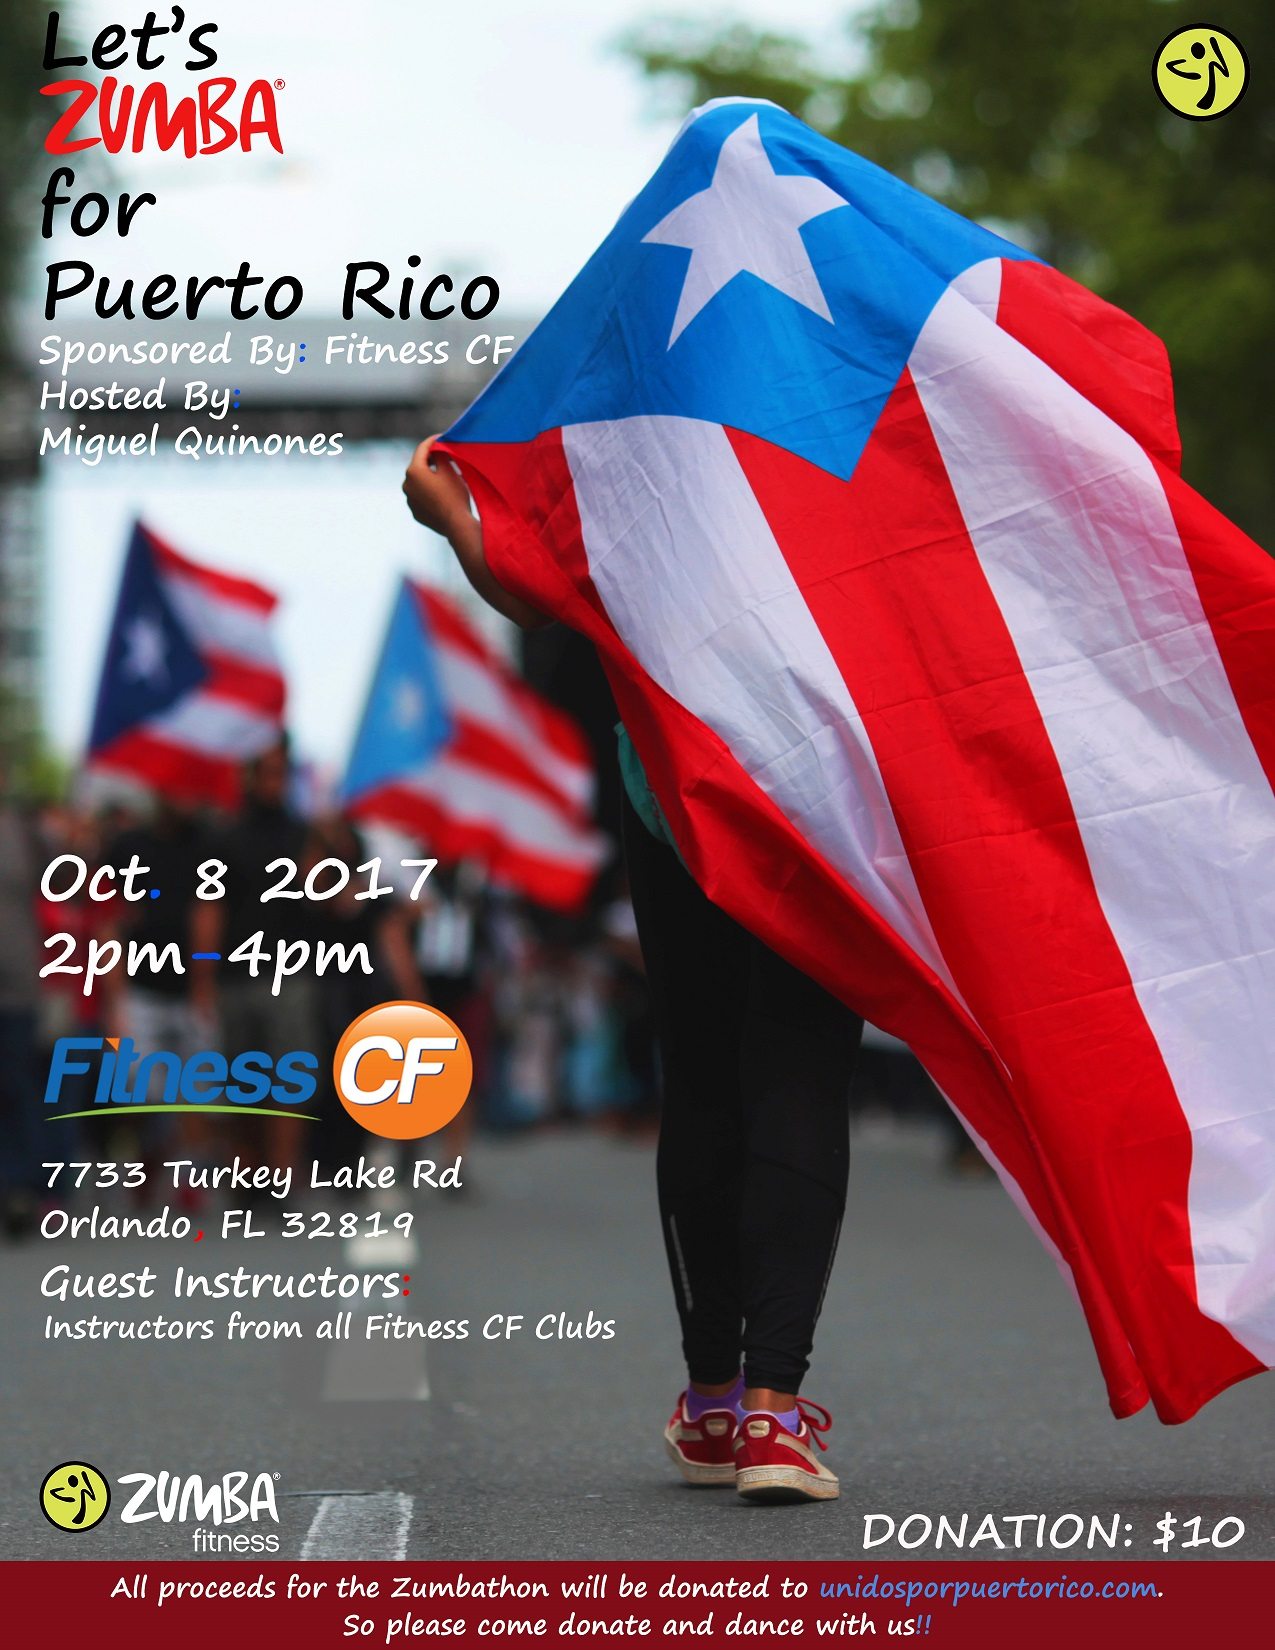 Zumba for Puerto Rico Event